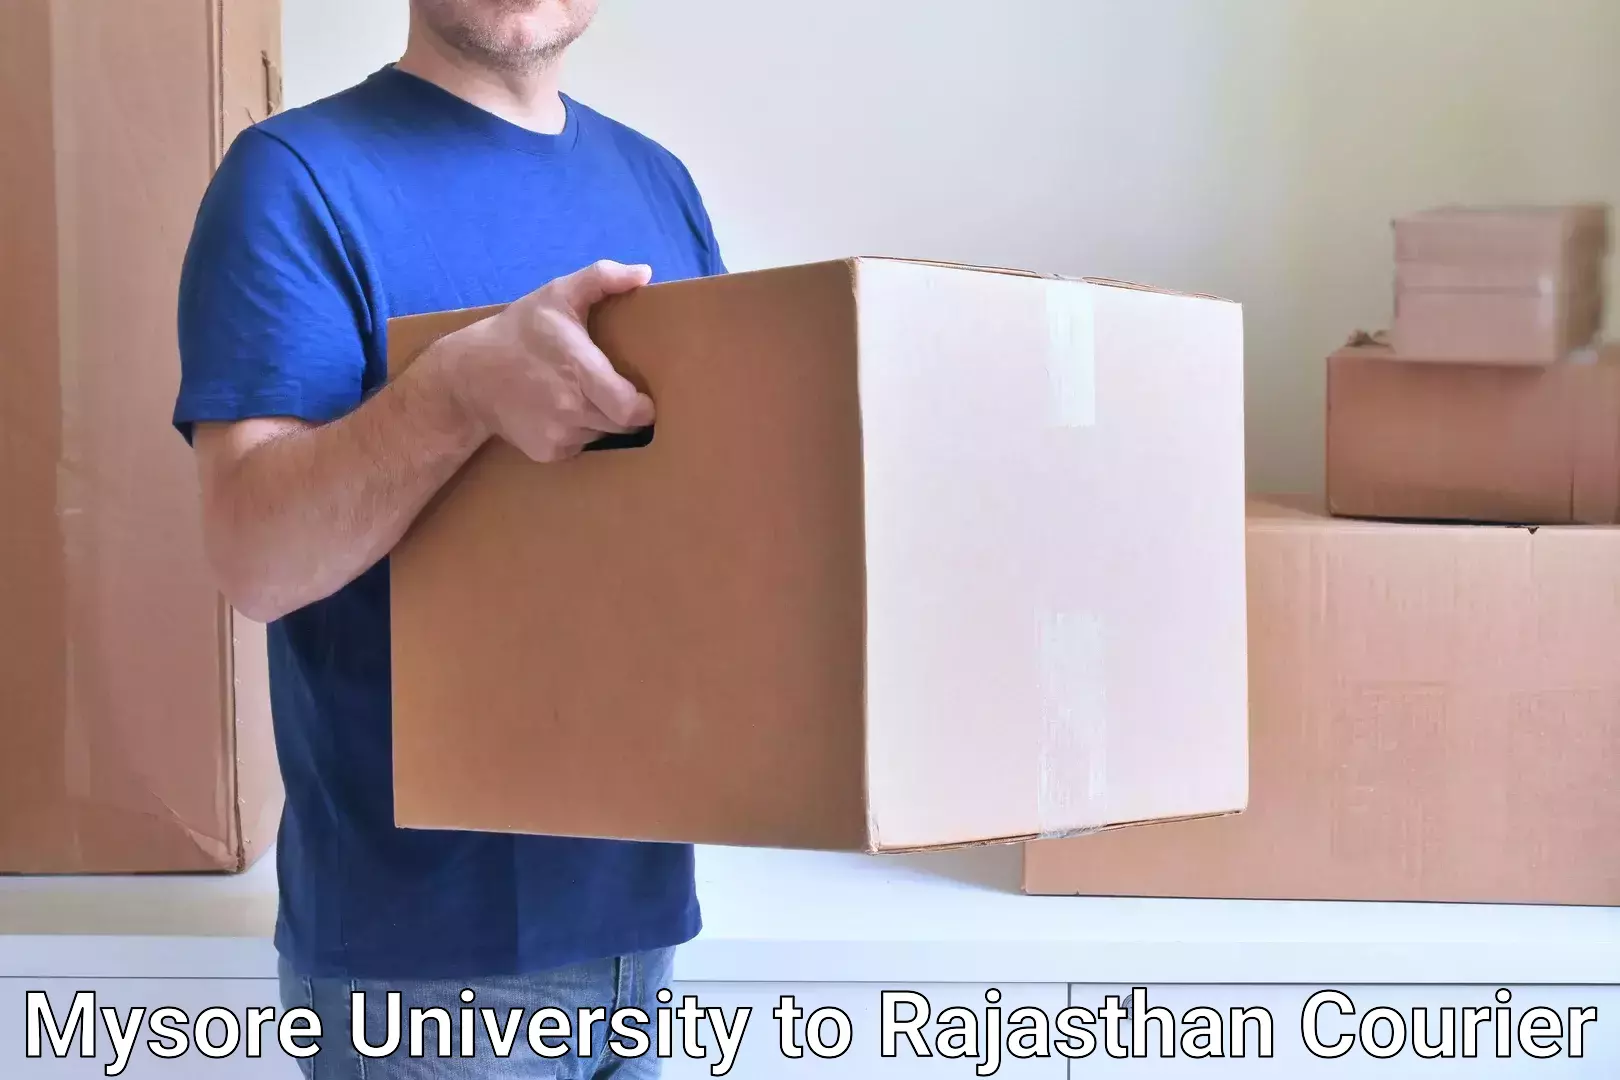 Custom courier packaging in Mysore University to Raila